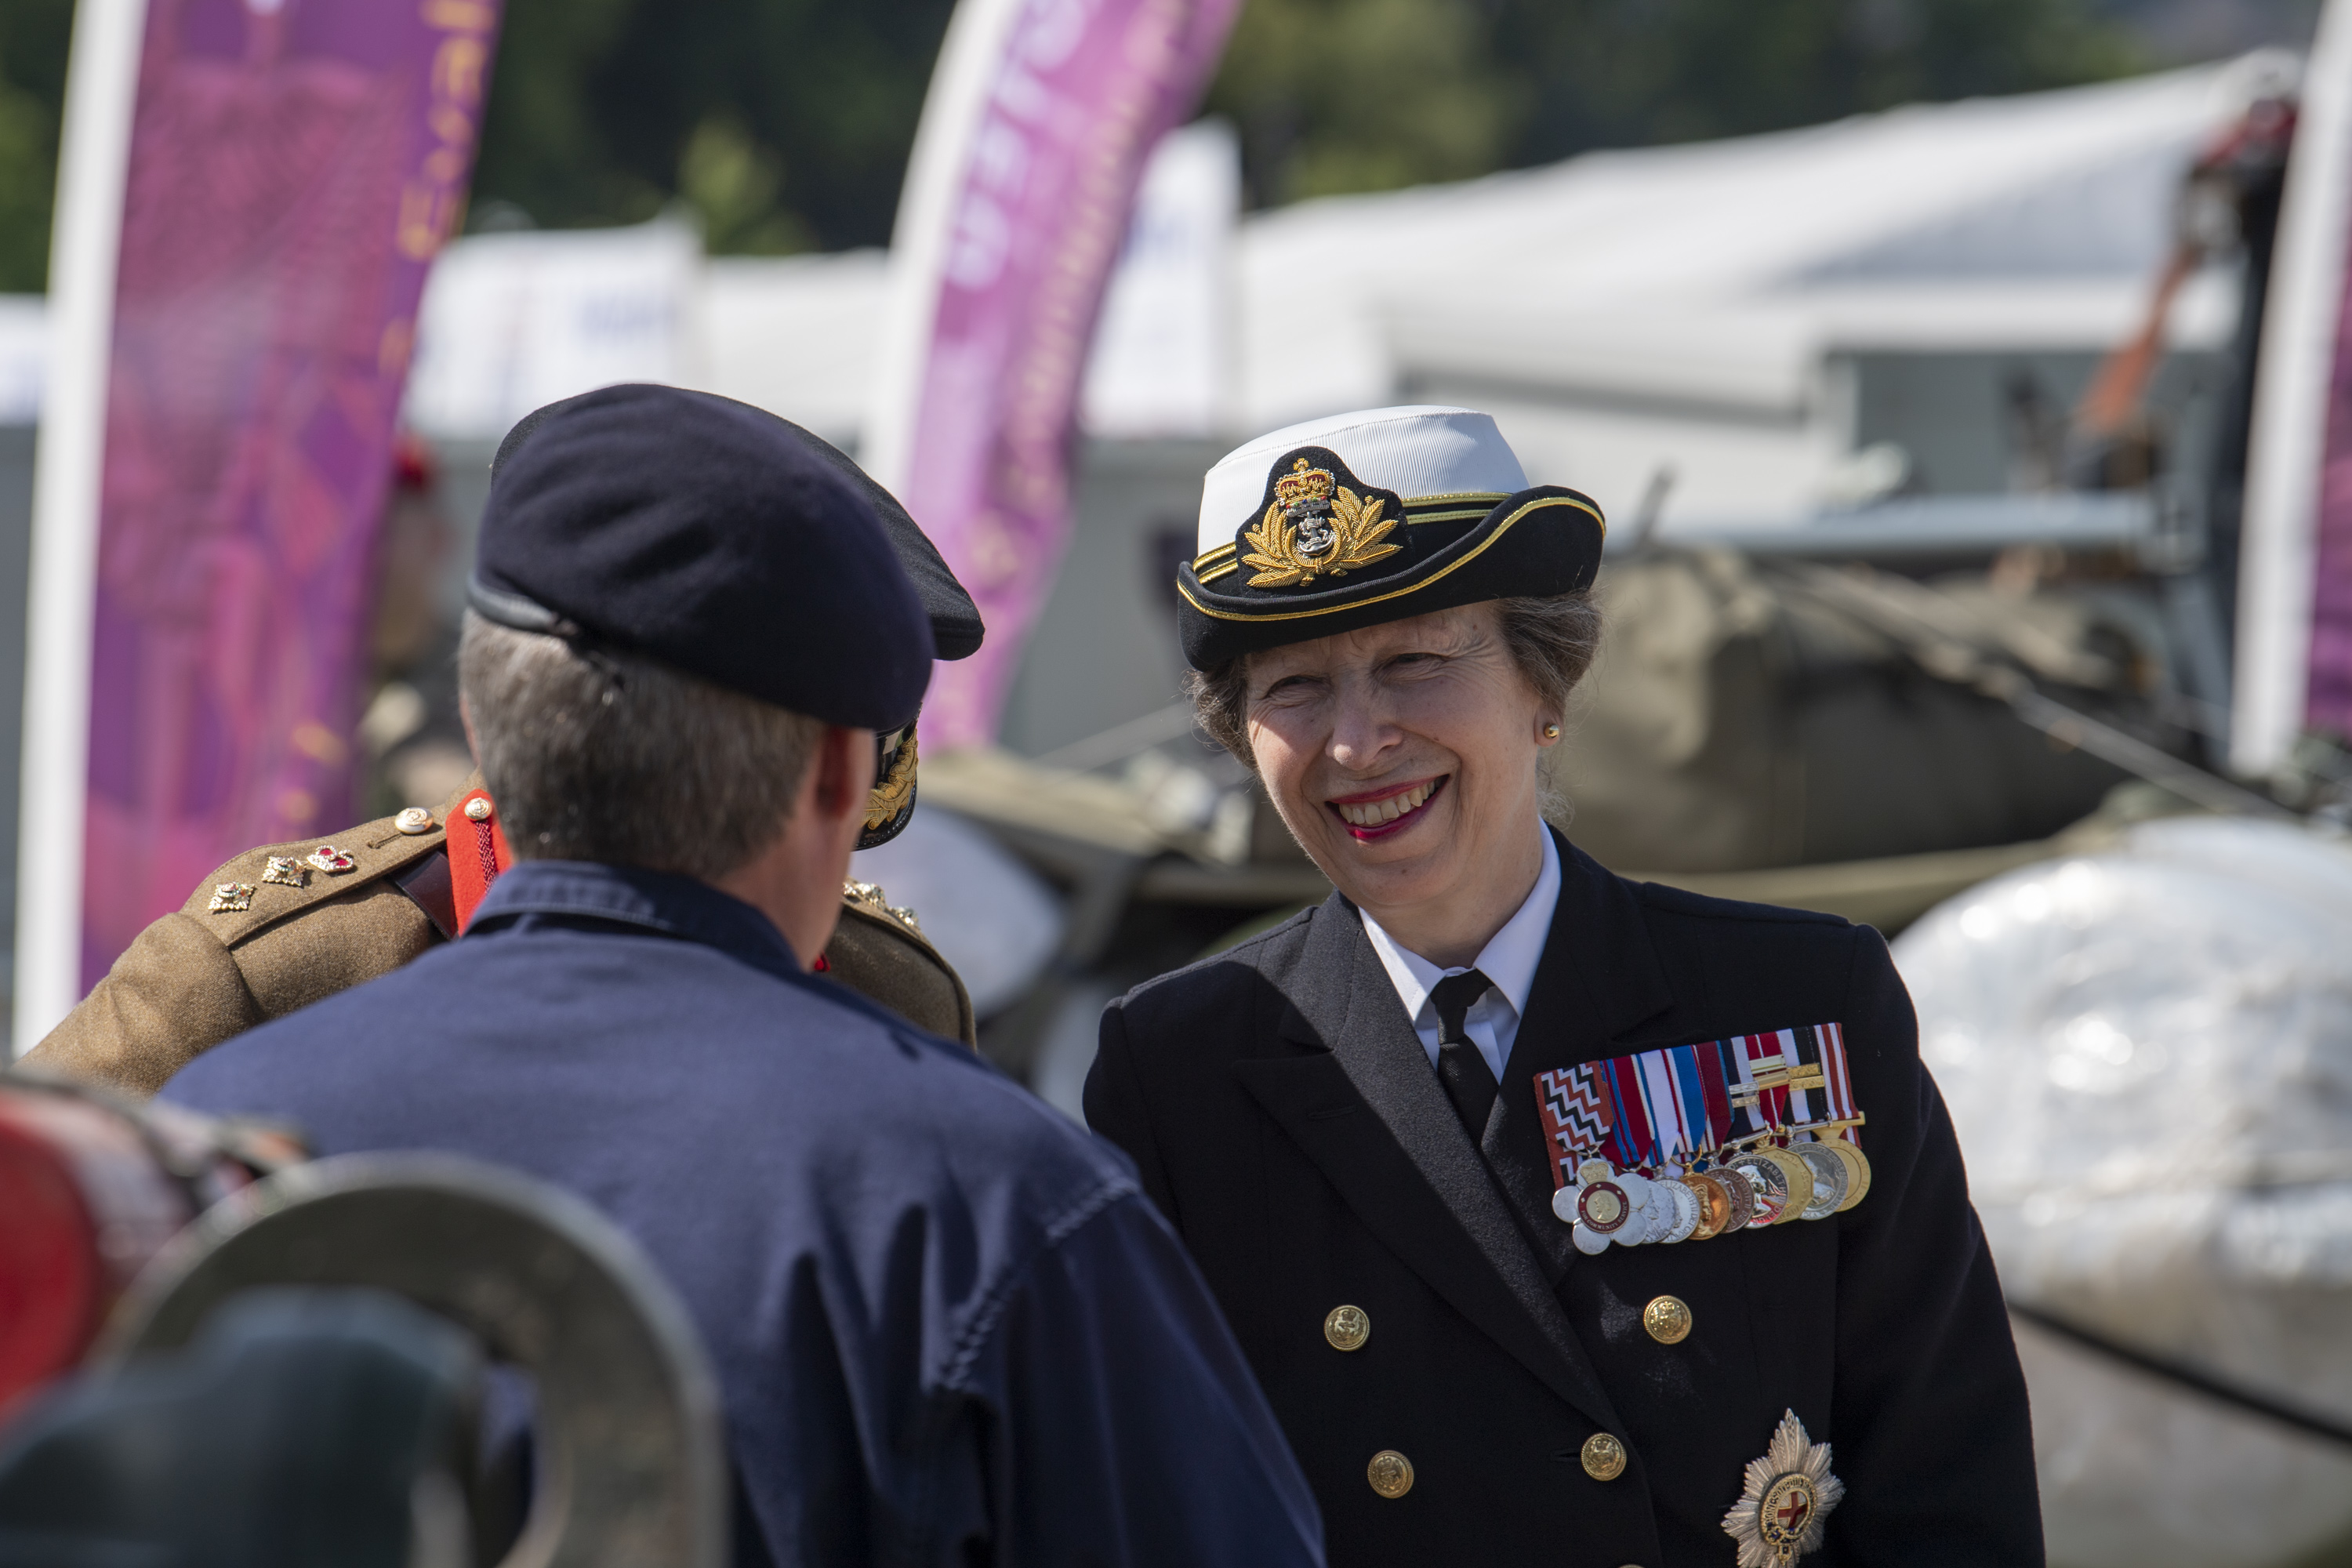 HRH The Princess Royal,Anne at the Salisbury Hudsons Field for Armed Forces Day talking to the troops.